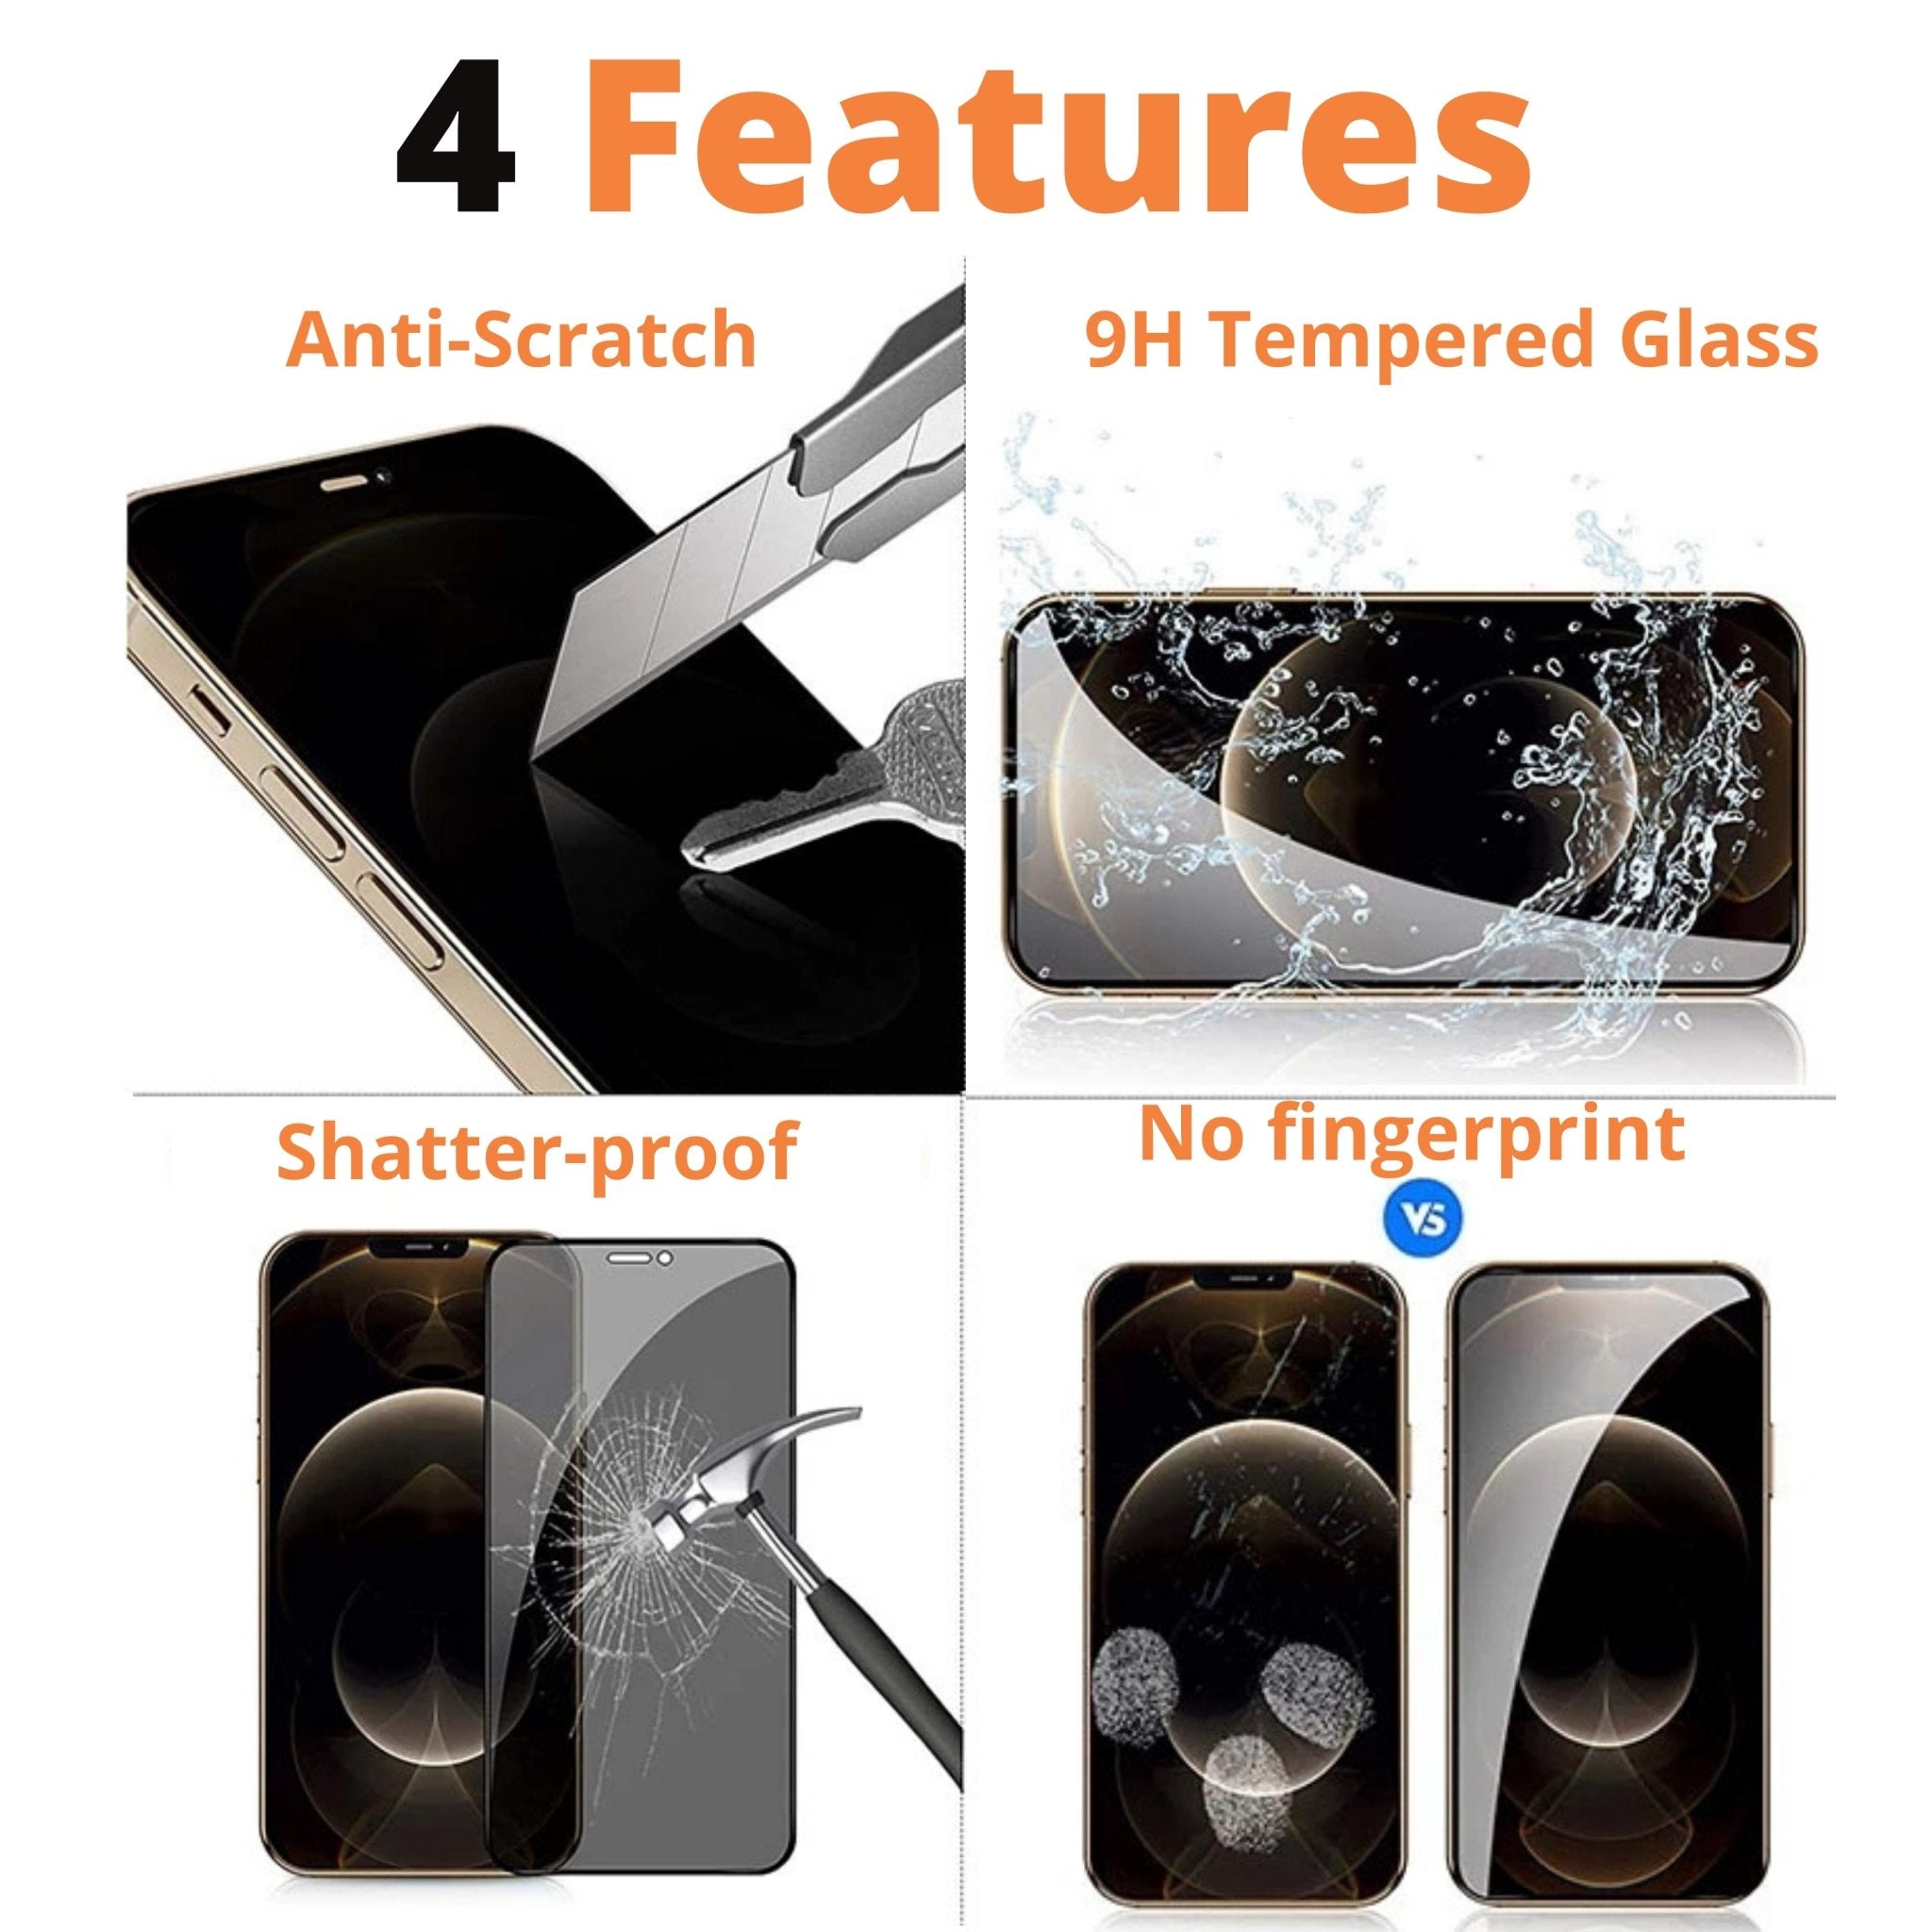 Buy Tempered Glass Screen Protector for iPhone 12 mini by Catalyst®